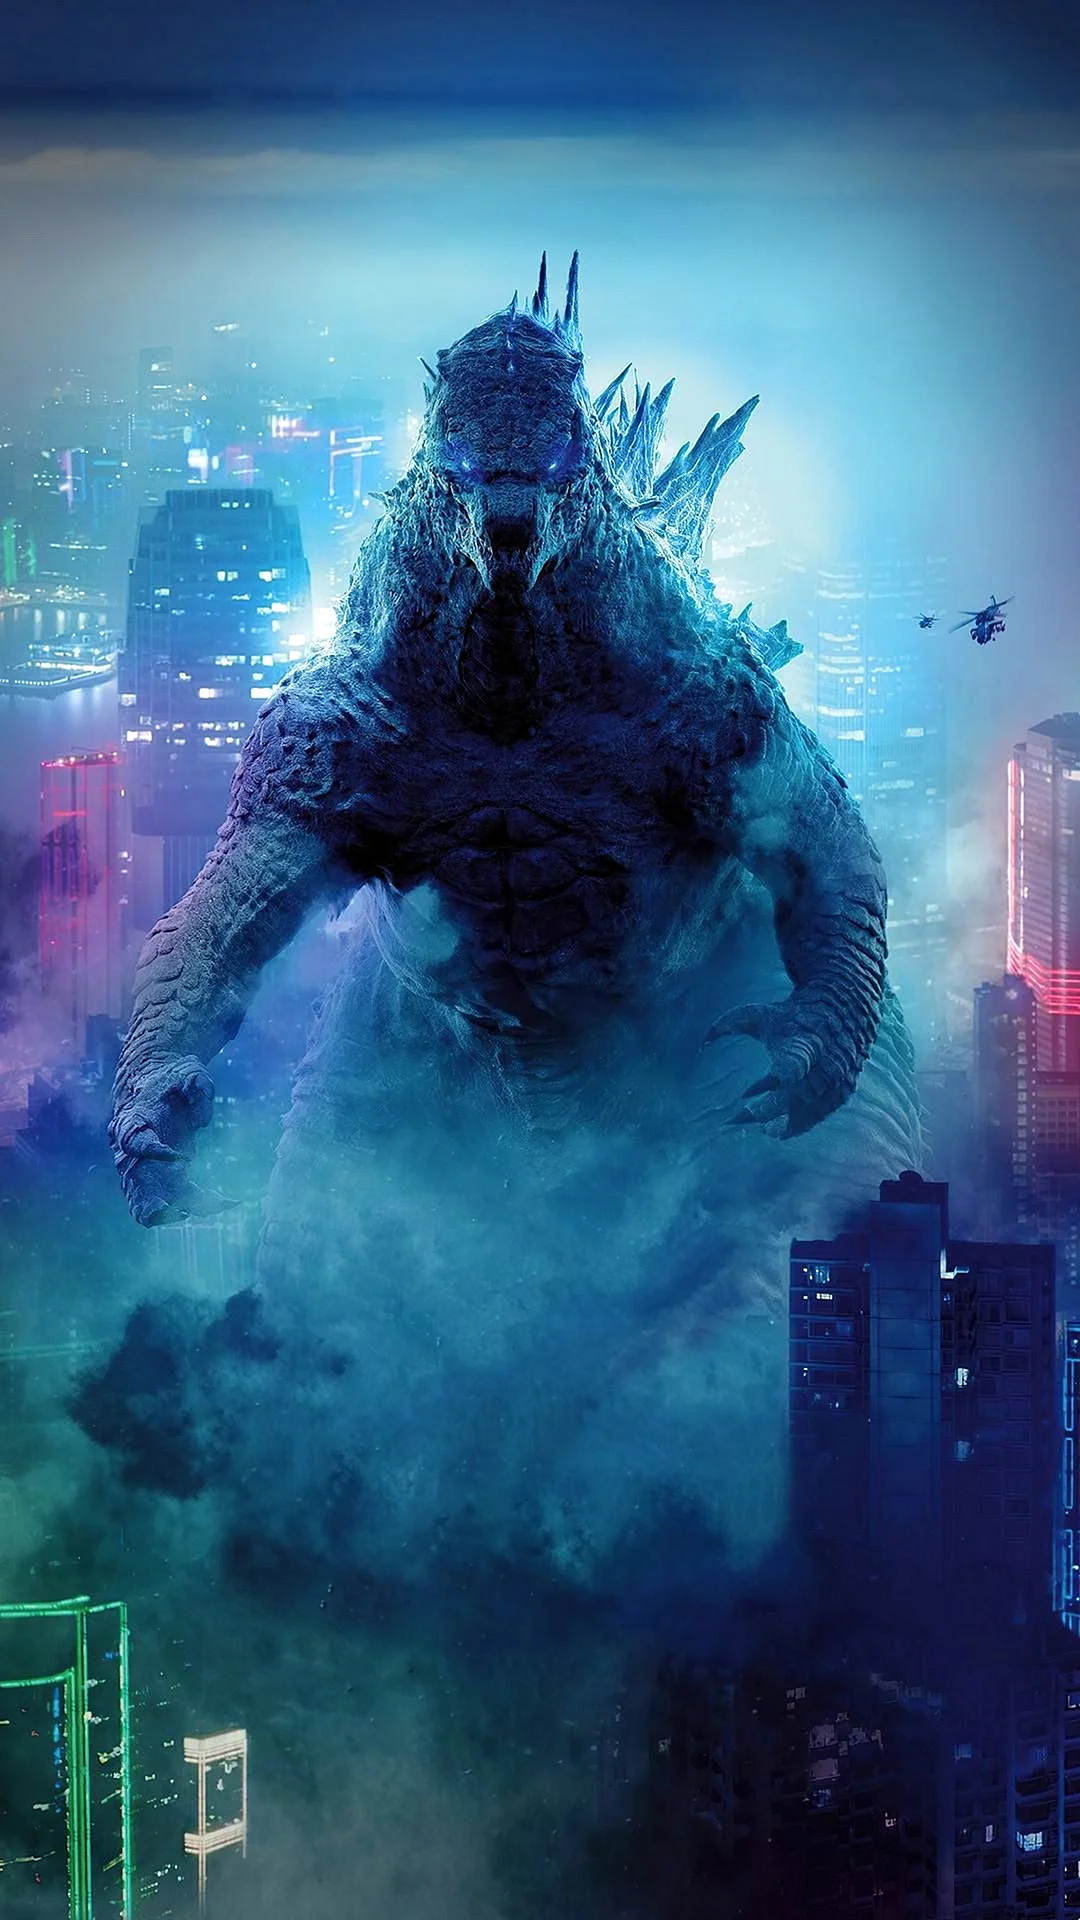 Godzilla 2014 Poster Wallpaper For iPhone